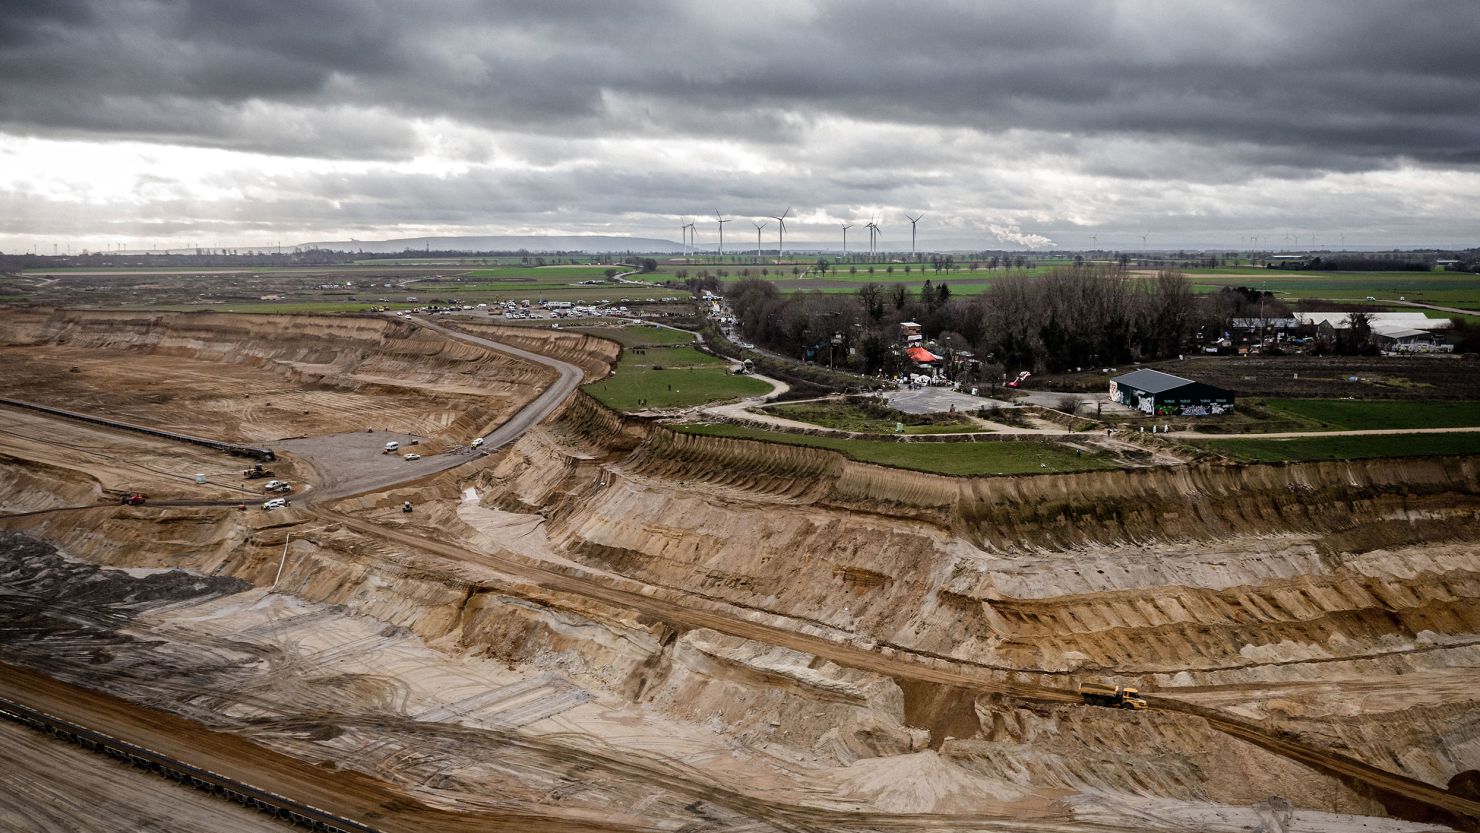 Germany this stop for village are | Thousands to mine. to a it plans CNN destroy coal gathering